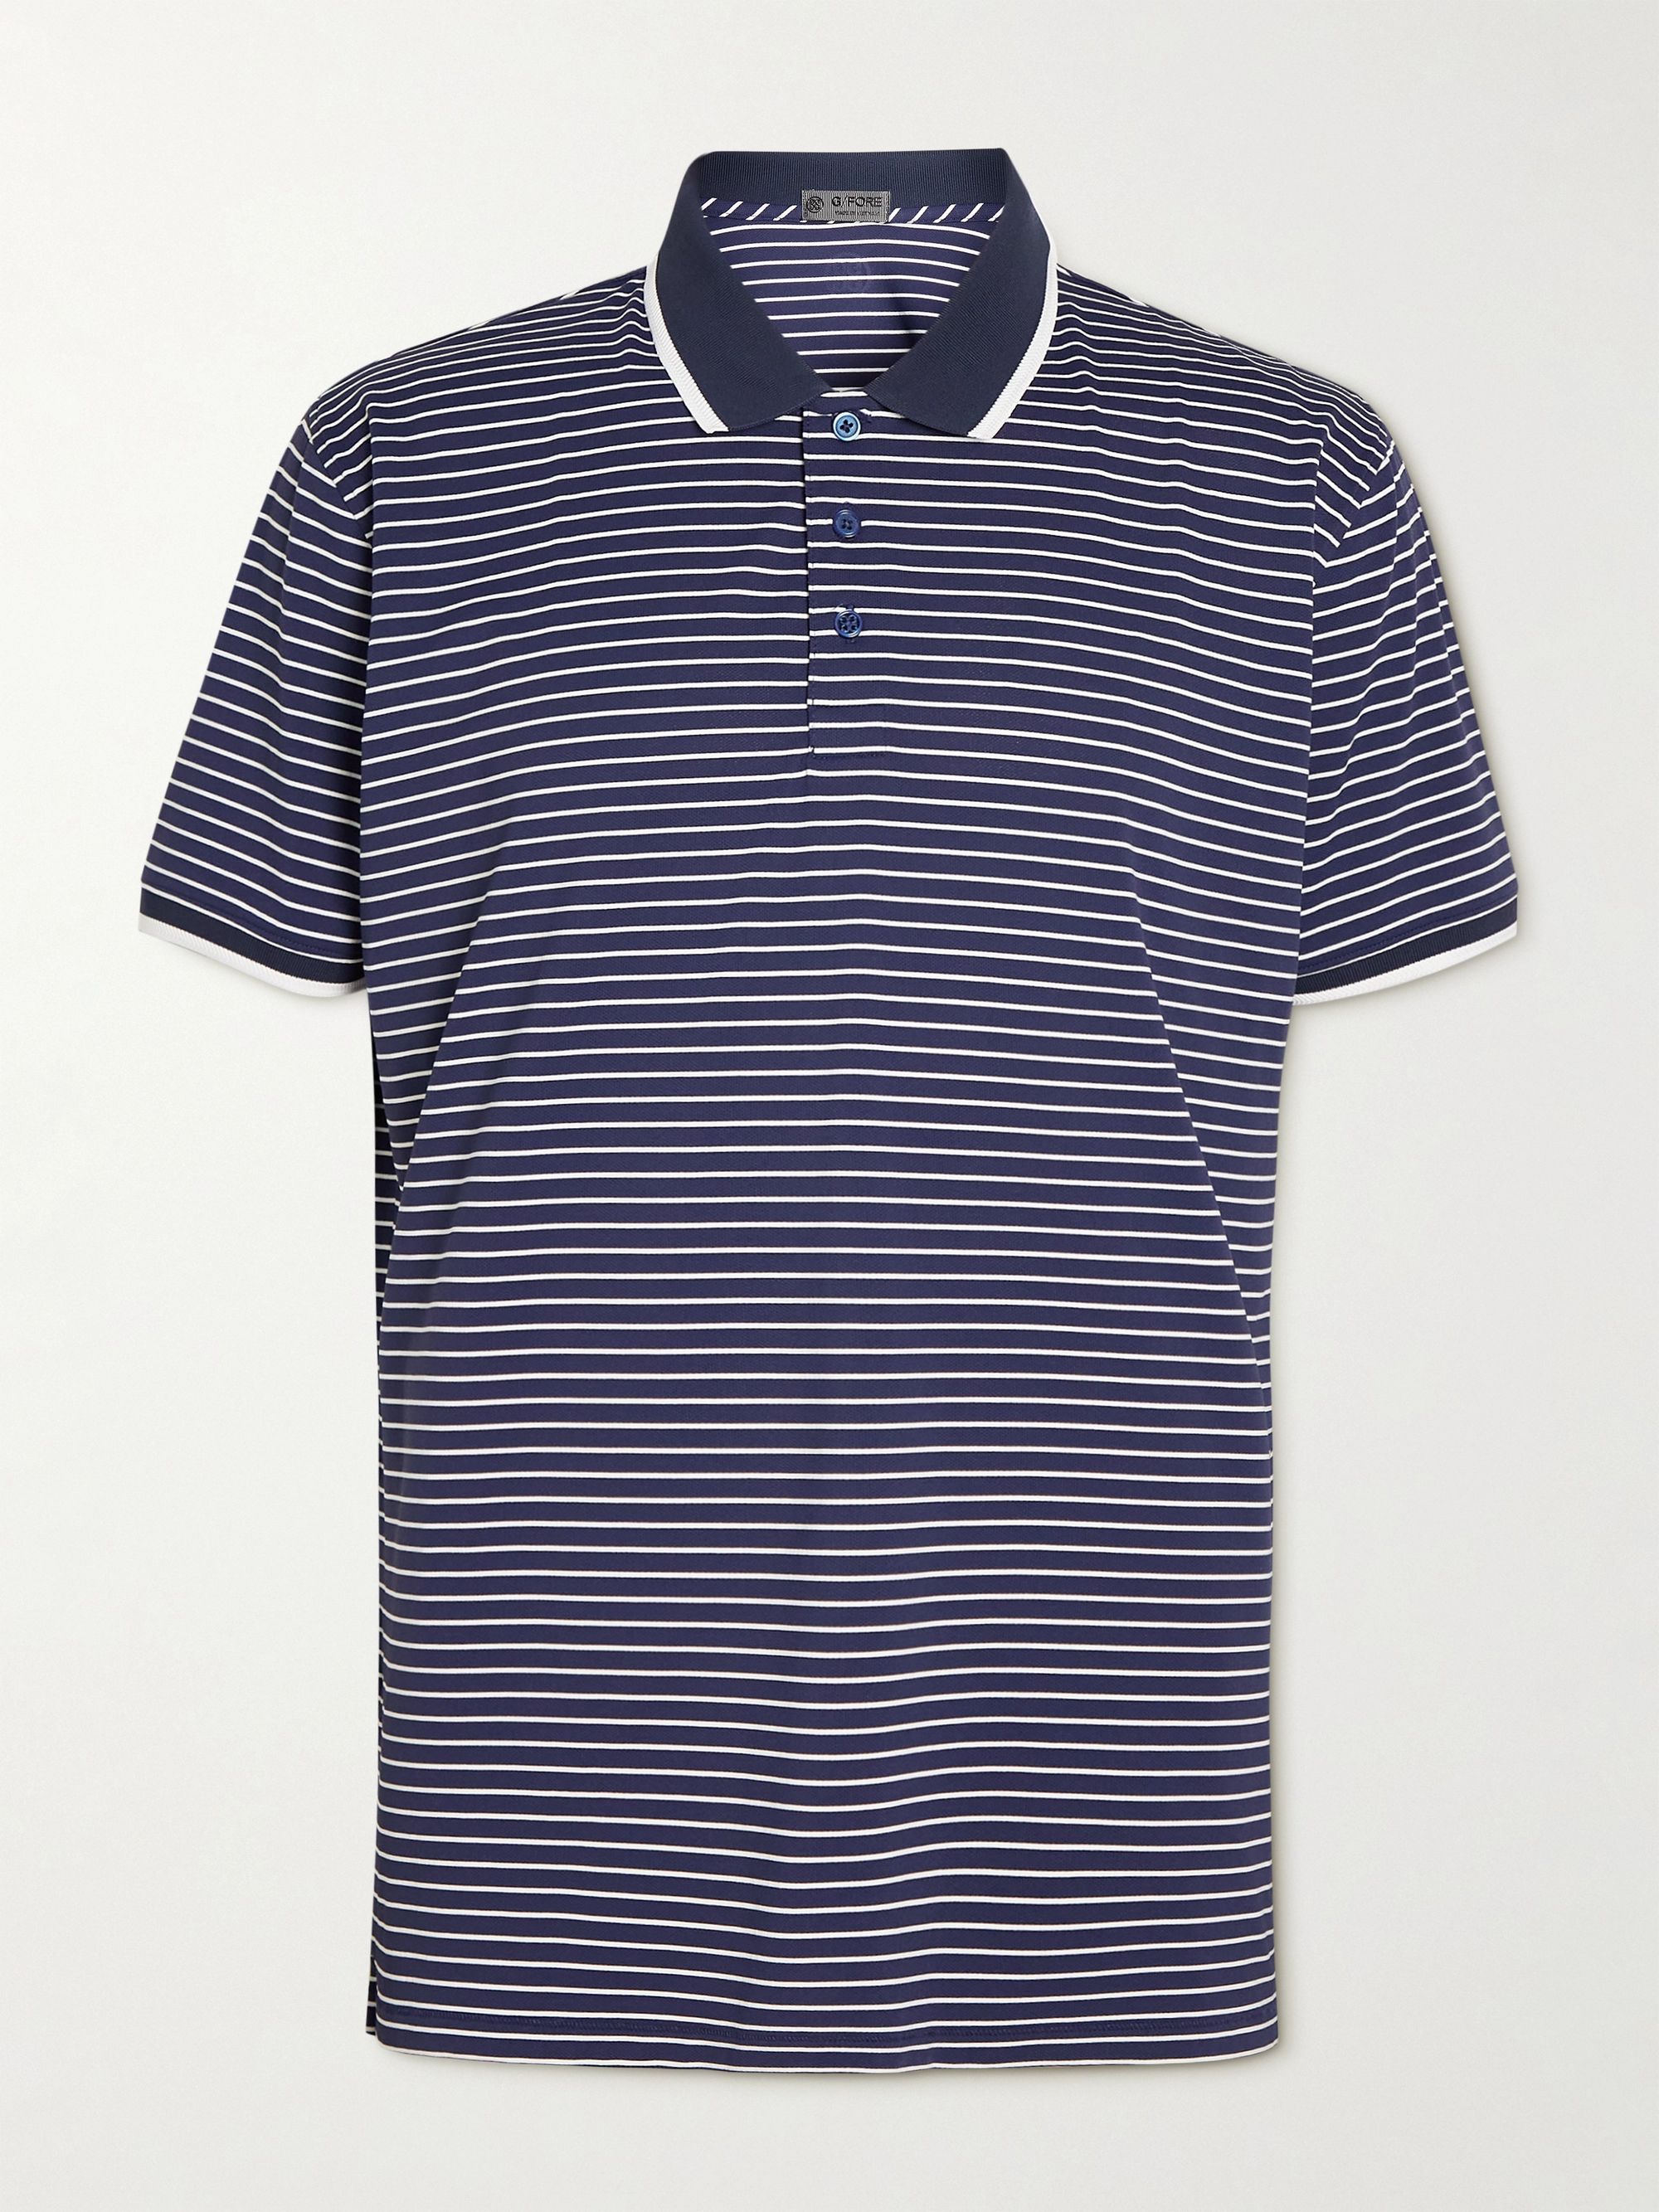 Navy Striped Perforated Stretch-Jersey Golf Polo Shirt | G/FORE | MR PORTER